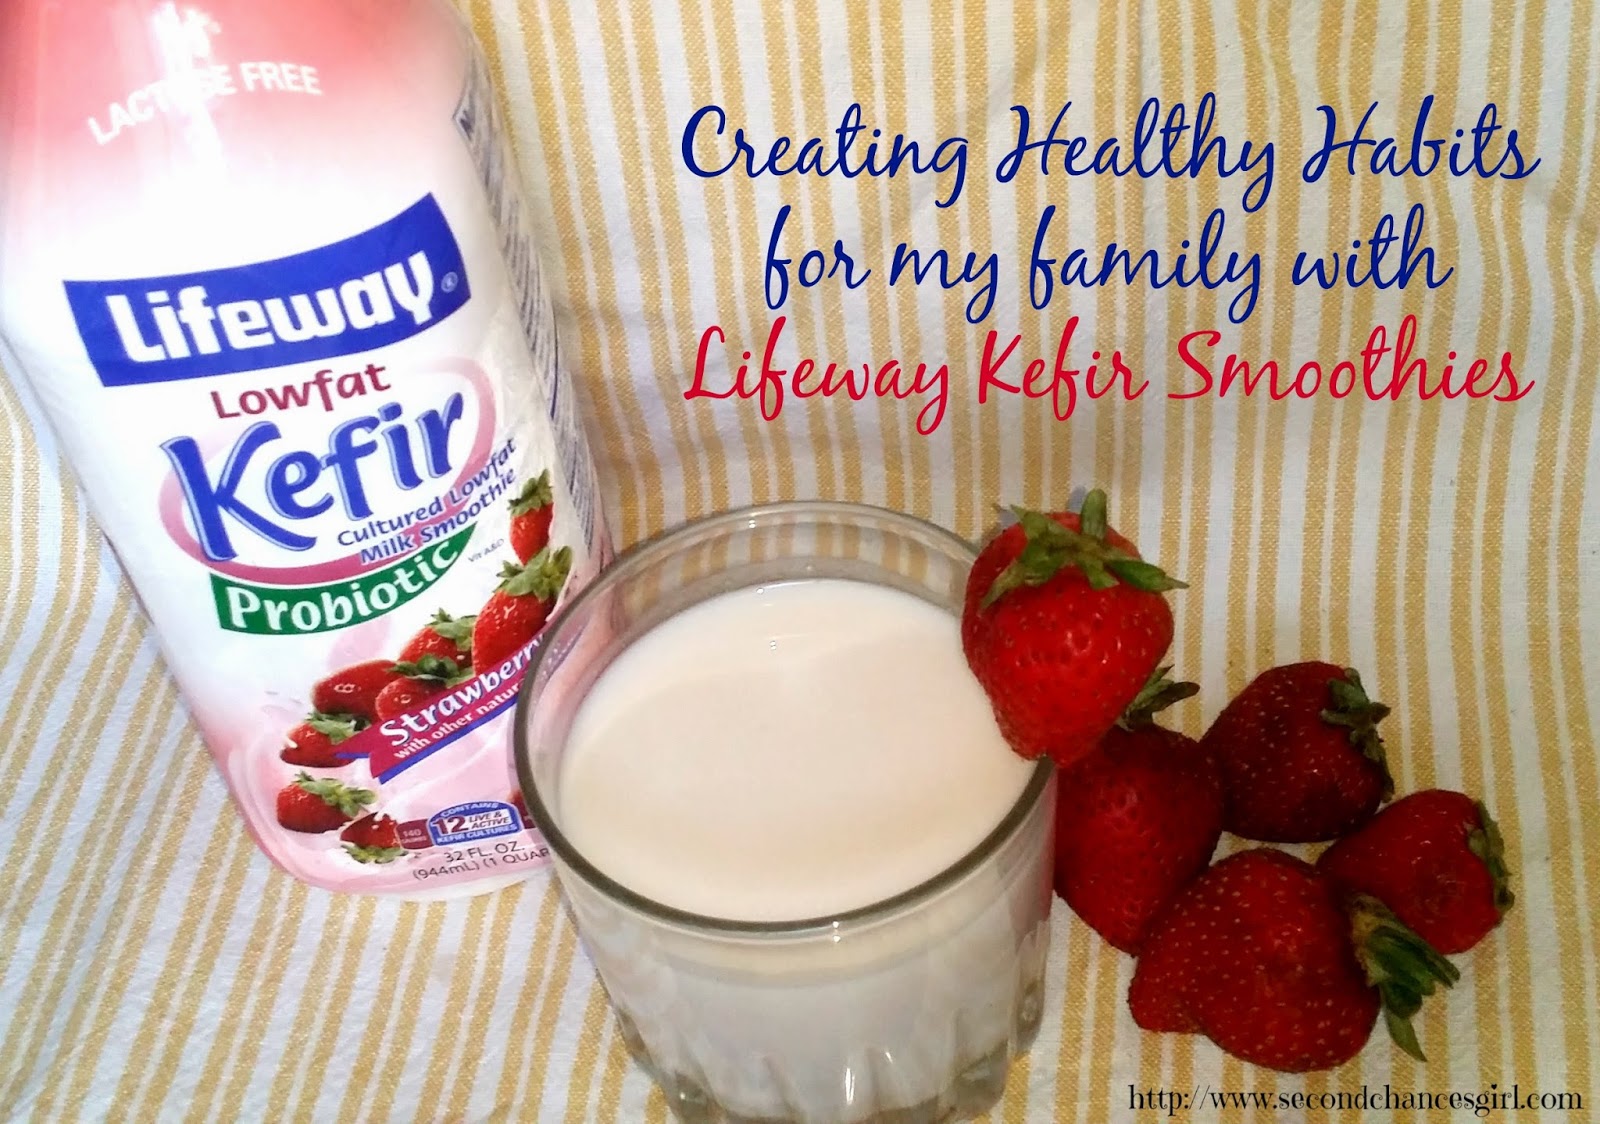 Creating healthy habits for my family with Lifeway Kefir Smoothies #KefirCreations #shop